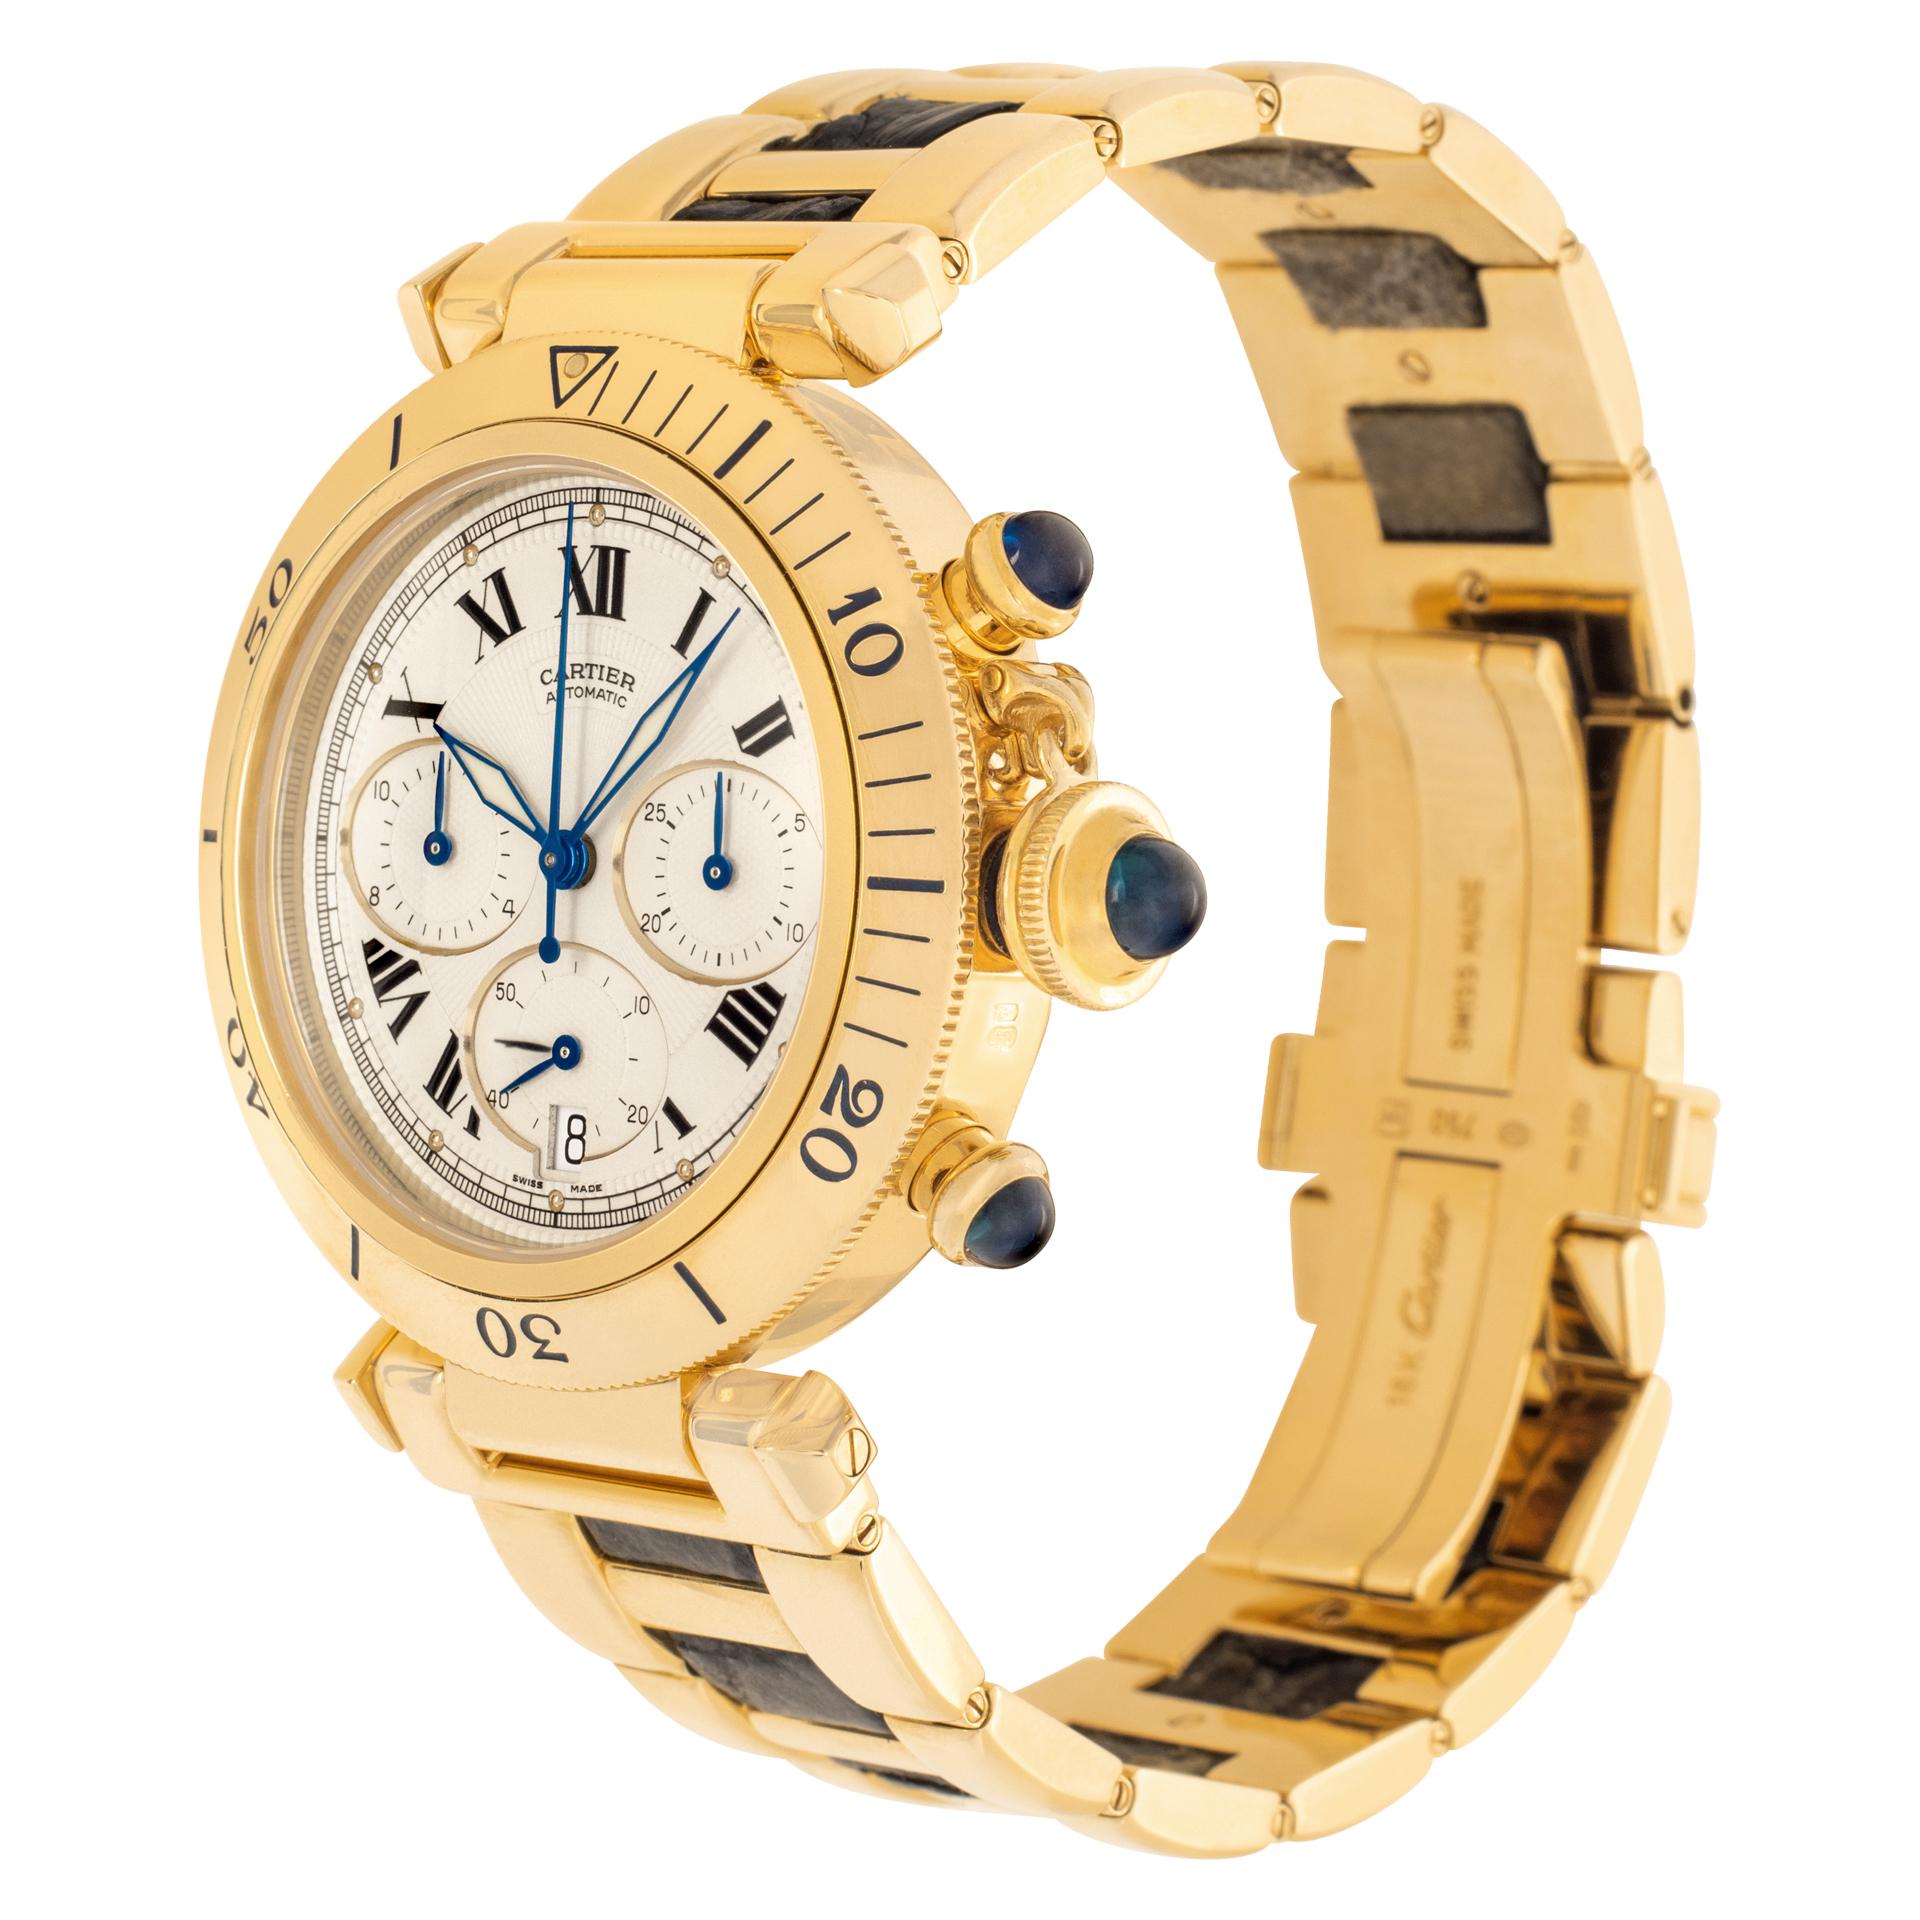 Cartier Pasha Chronograph in 18k yellow gold. Auto w/ subseconds, date and chronograph.37 jewels. Ref 2111. With 3 cabochon sapphires (on the crown & pusher). Bracelet made in 18k yellow gold and leather (leather showing slight signs of wear). Circa